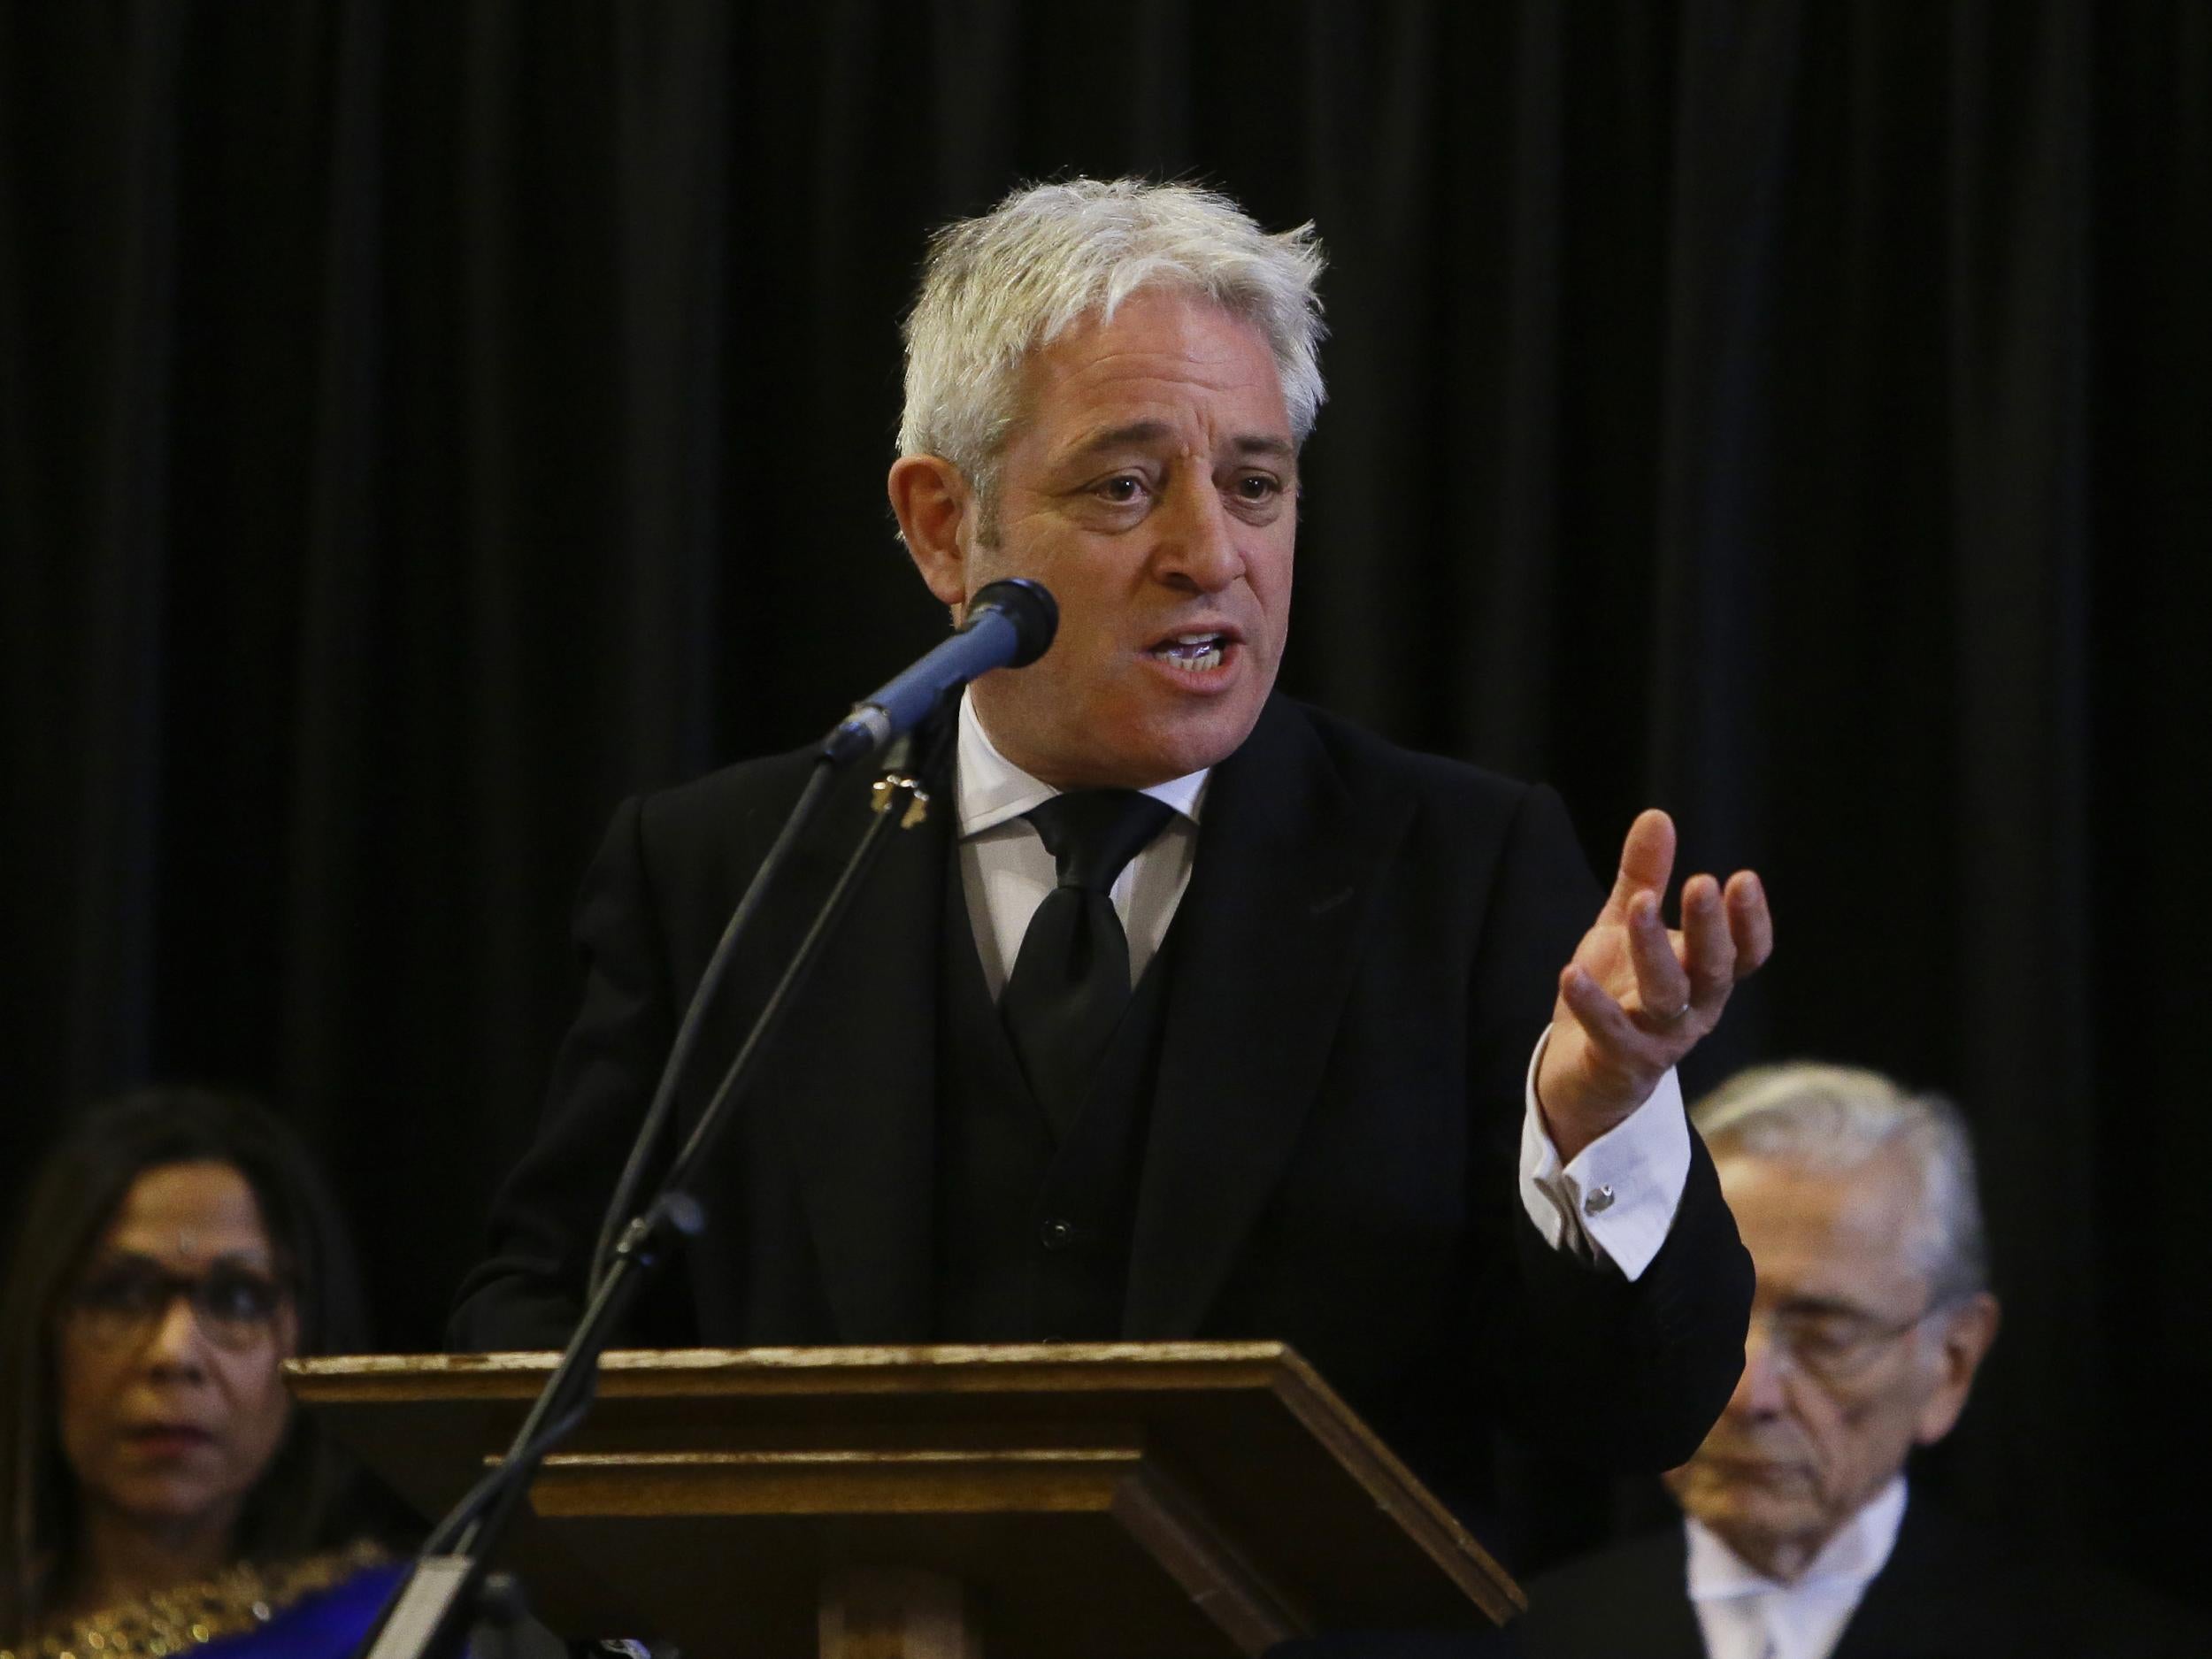 John Bercow: Commons Speaker reported to parliamentary standards over &apos;stupid woman&apos; claims